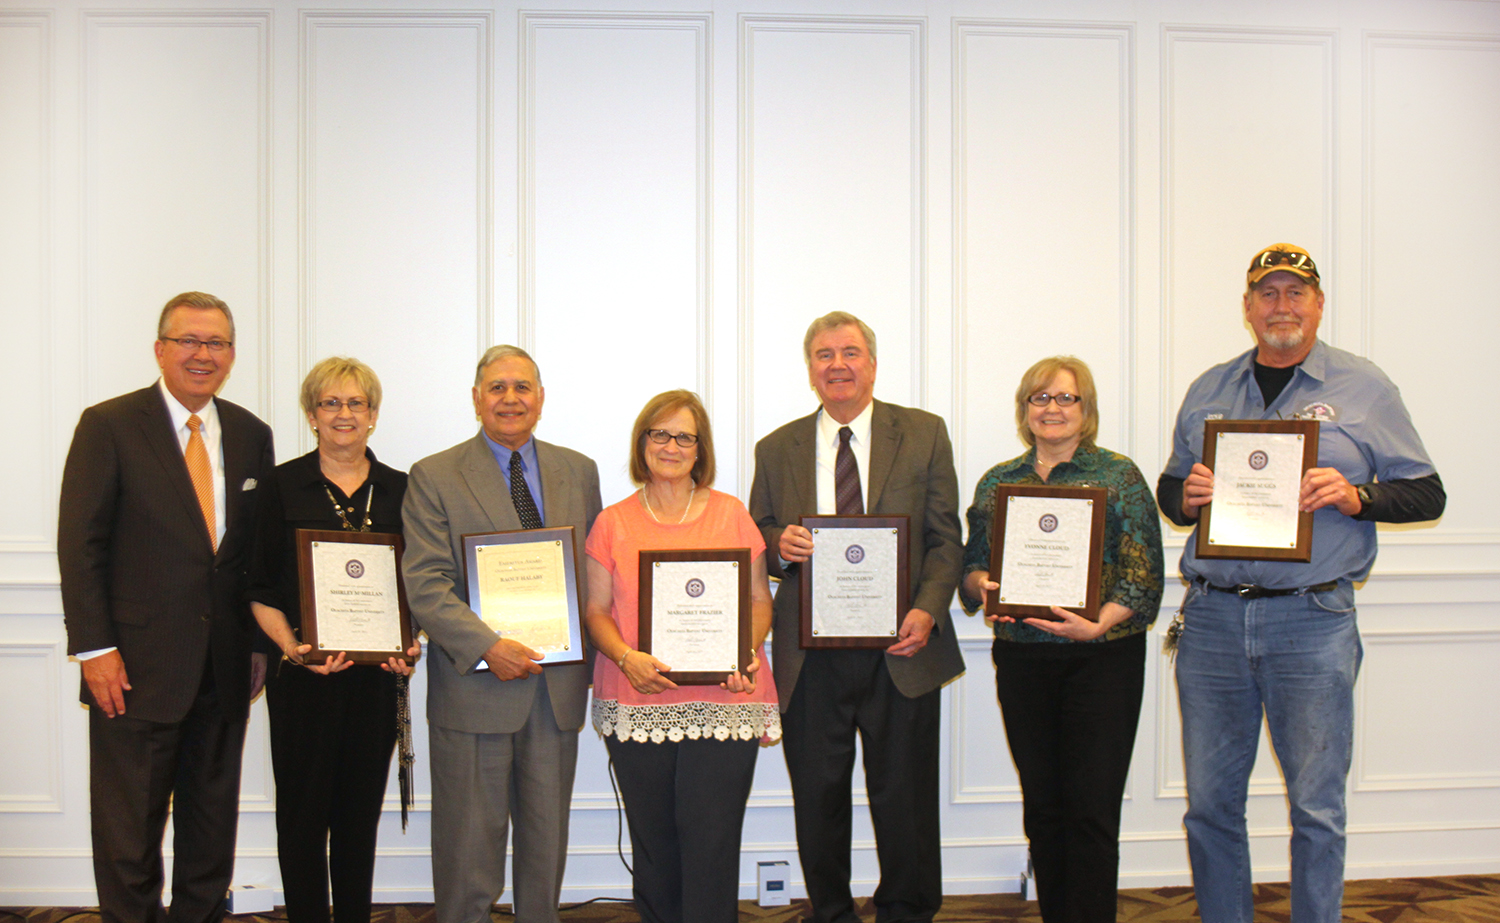 Ouachita President Rex Horne (at left) affirmed the work of six retirees, including (from left) Shirley McMillan, Dr. Raouf Halaby, Margaret Frazier, John Cloud, Yvonne Cloud and Jackie Suggs.